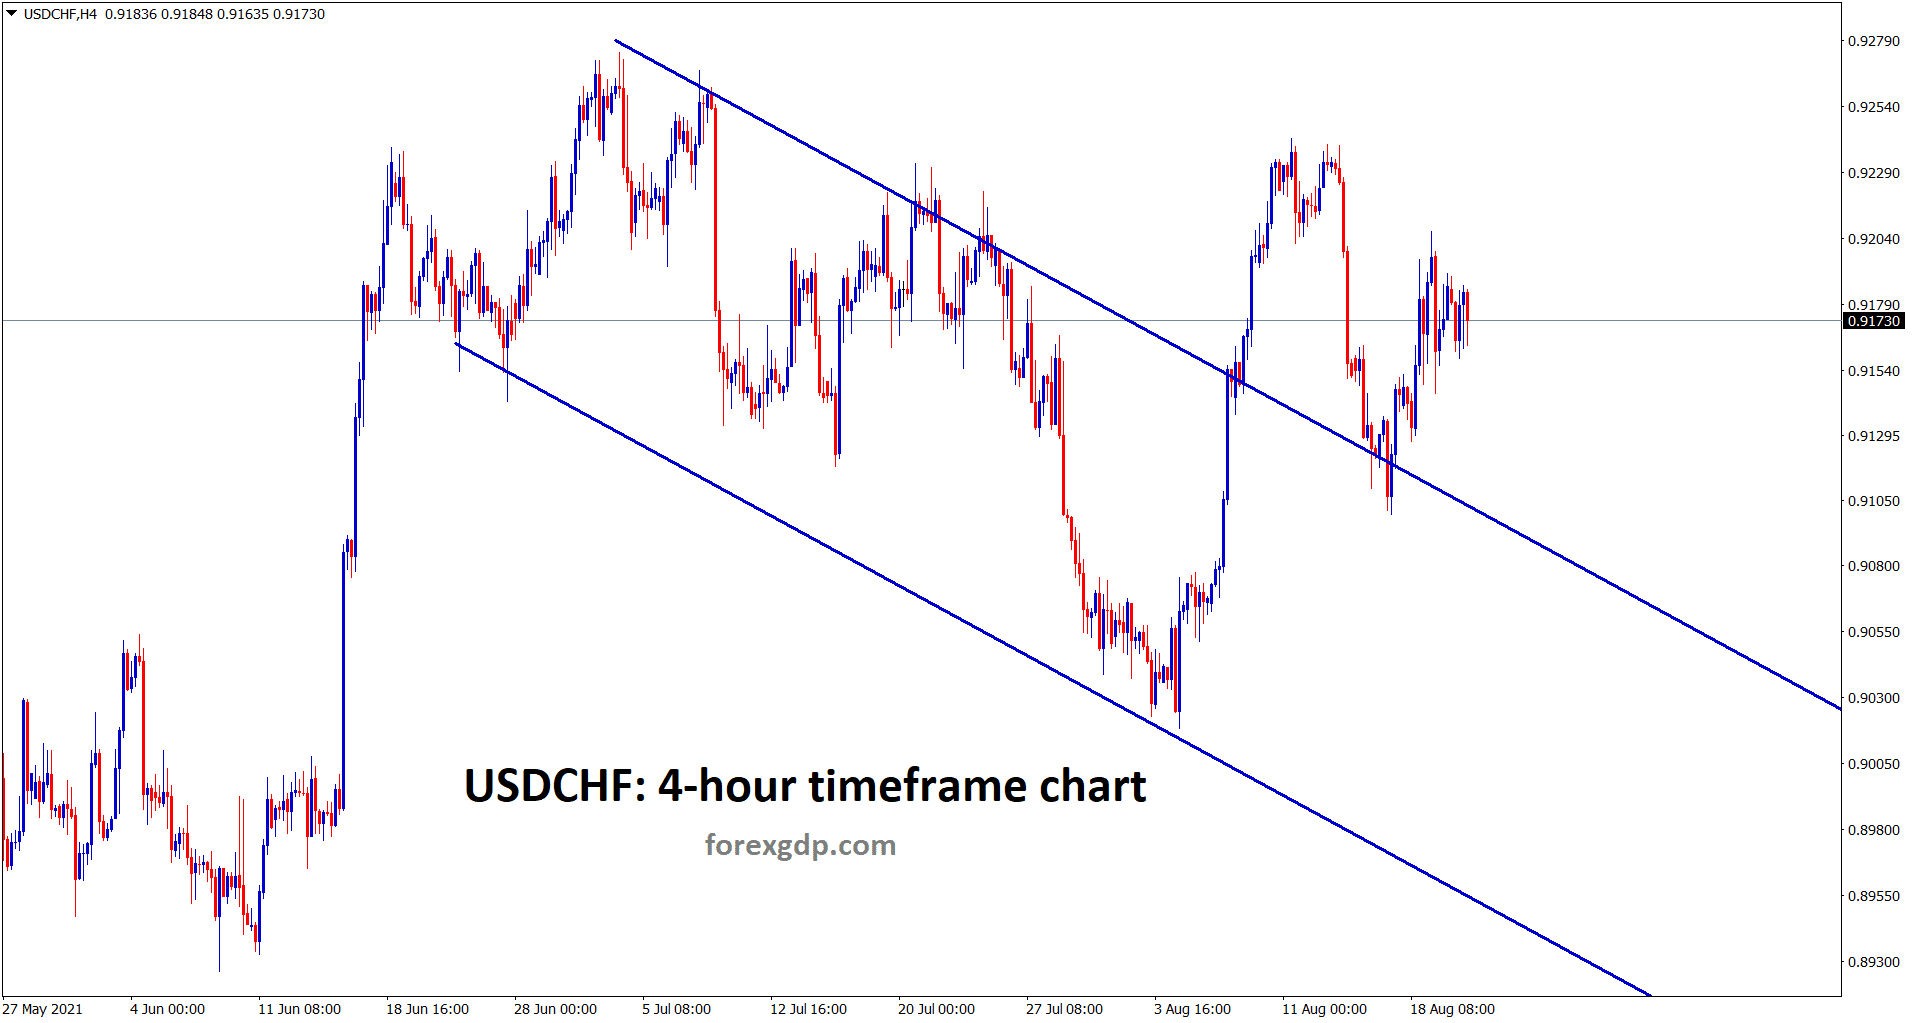 USDCHF breakout and retest the previous descending channel